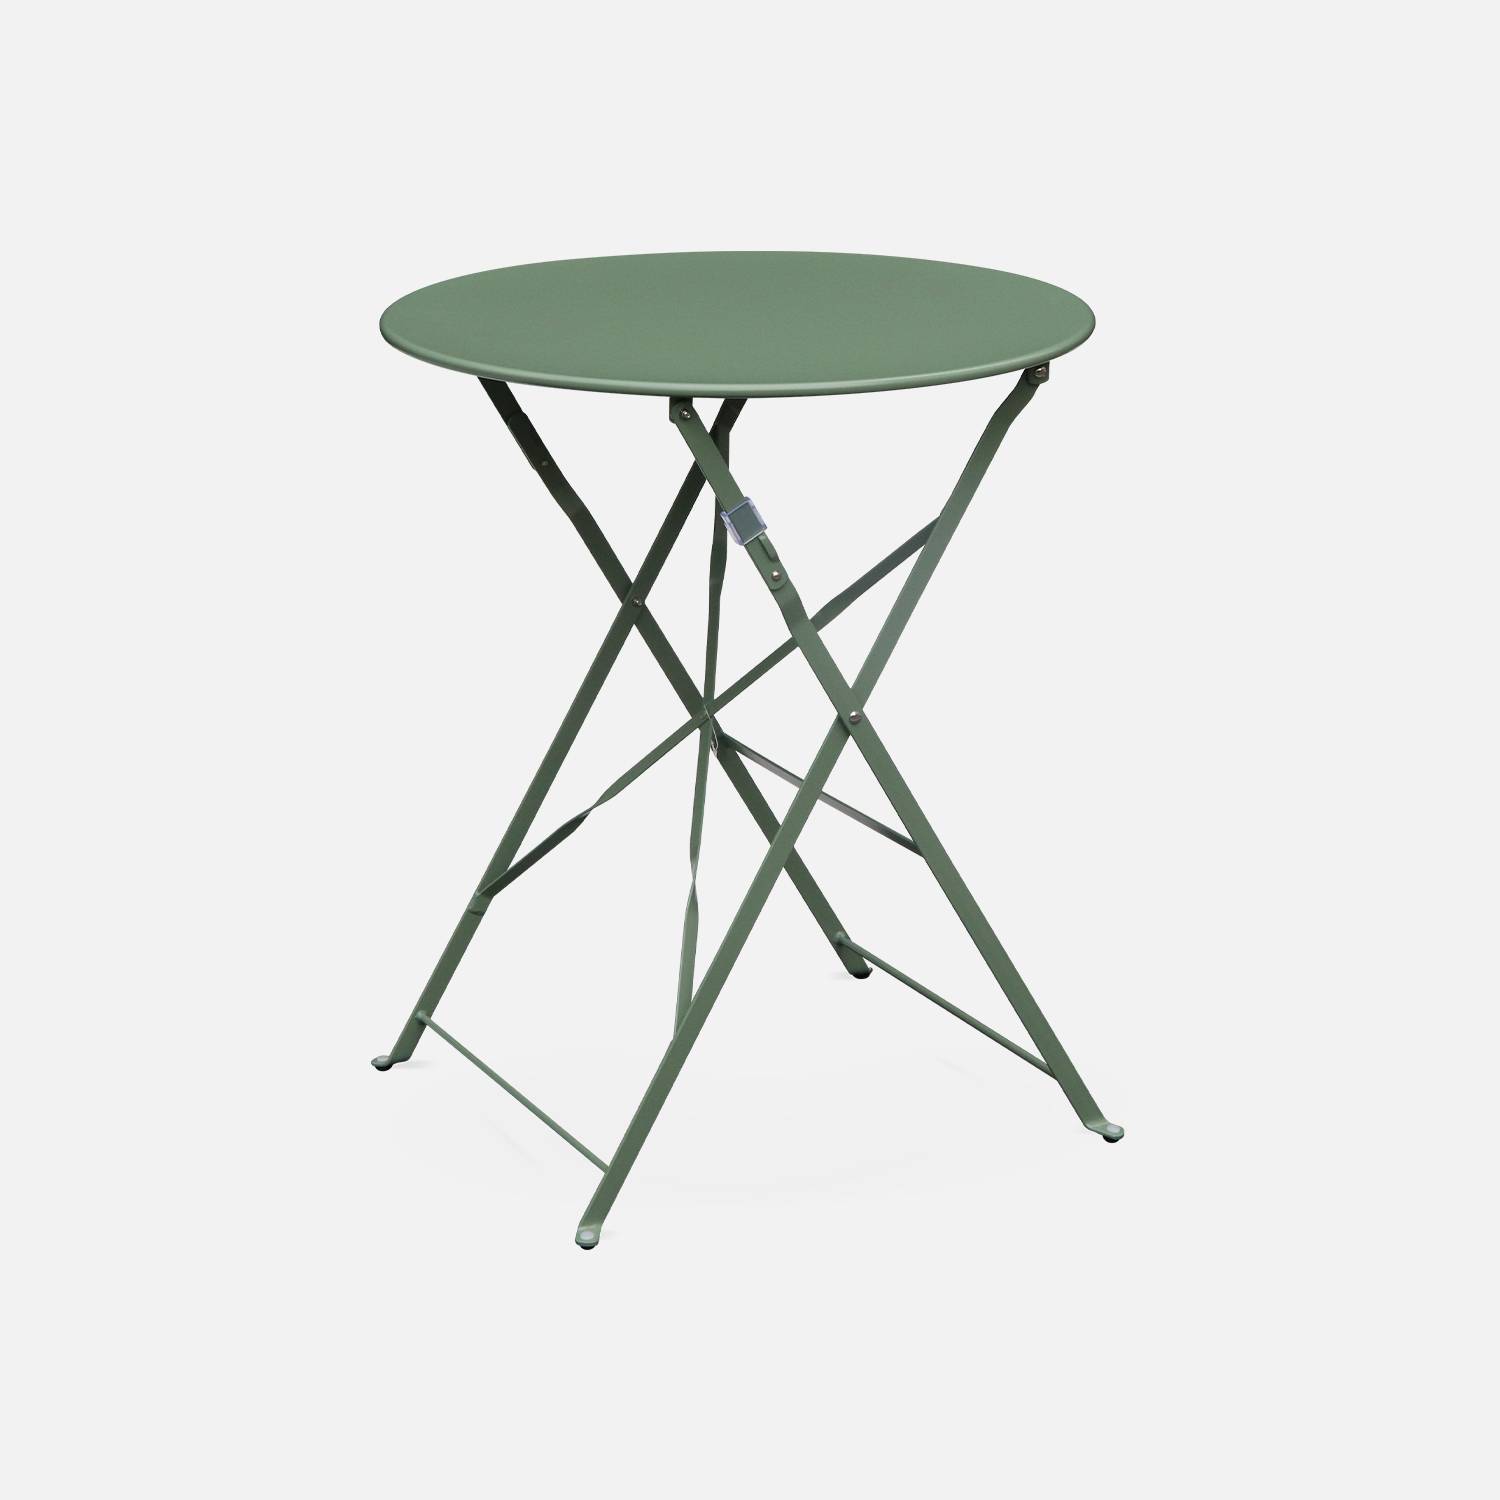 2-seater foldable thermo-lacquered steel bistro garden table with chairs, Ø60cm - Emilia - Sage green Photo3